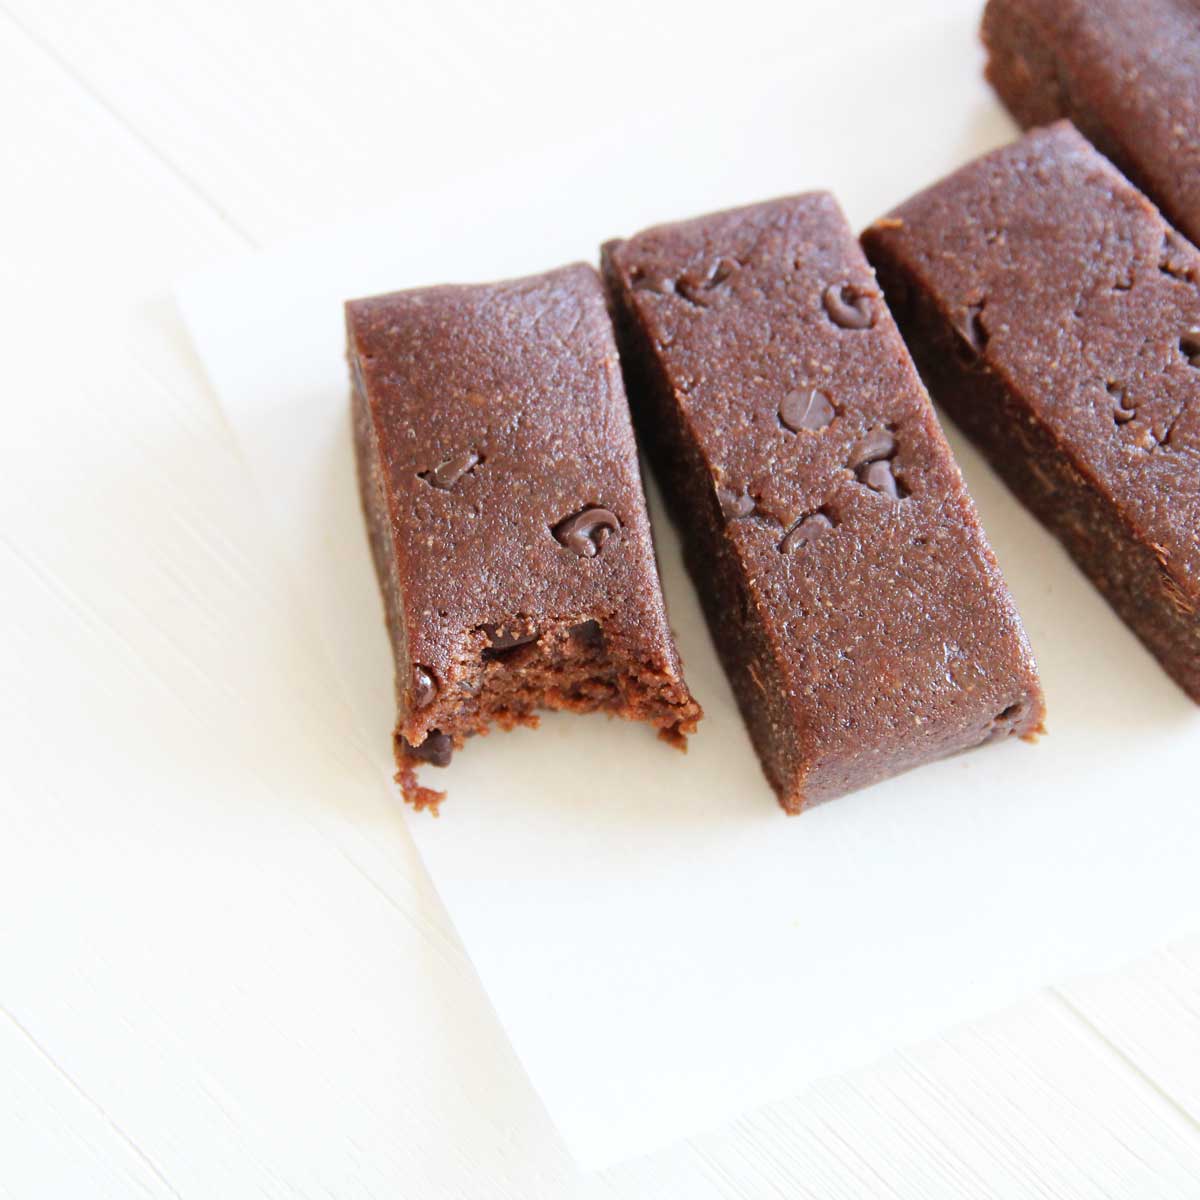 Easy Nutella Protein Bars (with Collagen Peptides Protein Powder) - Nutella Protein Bars